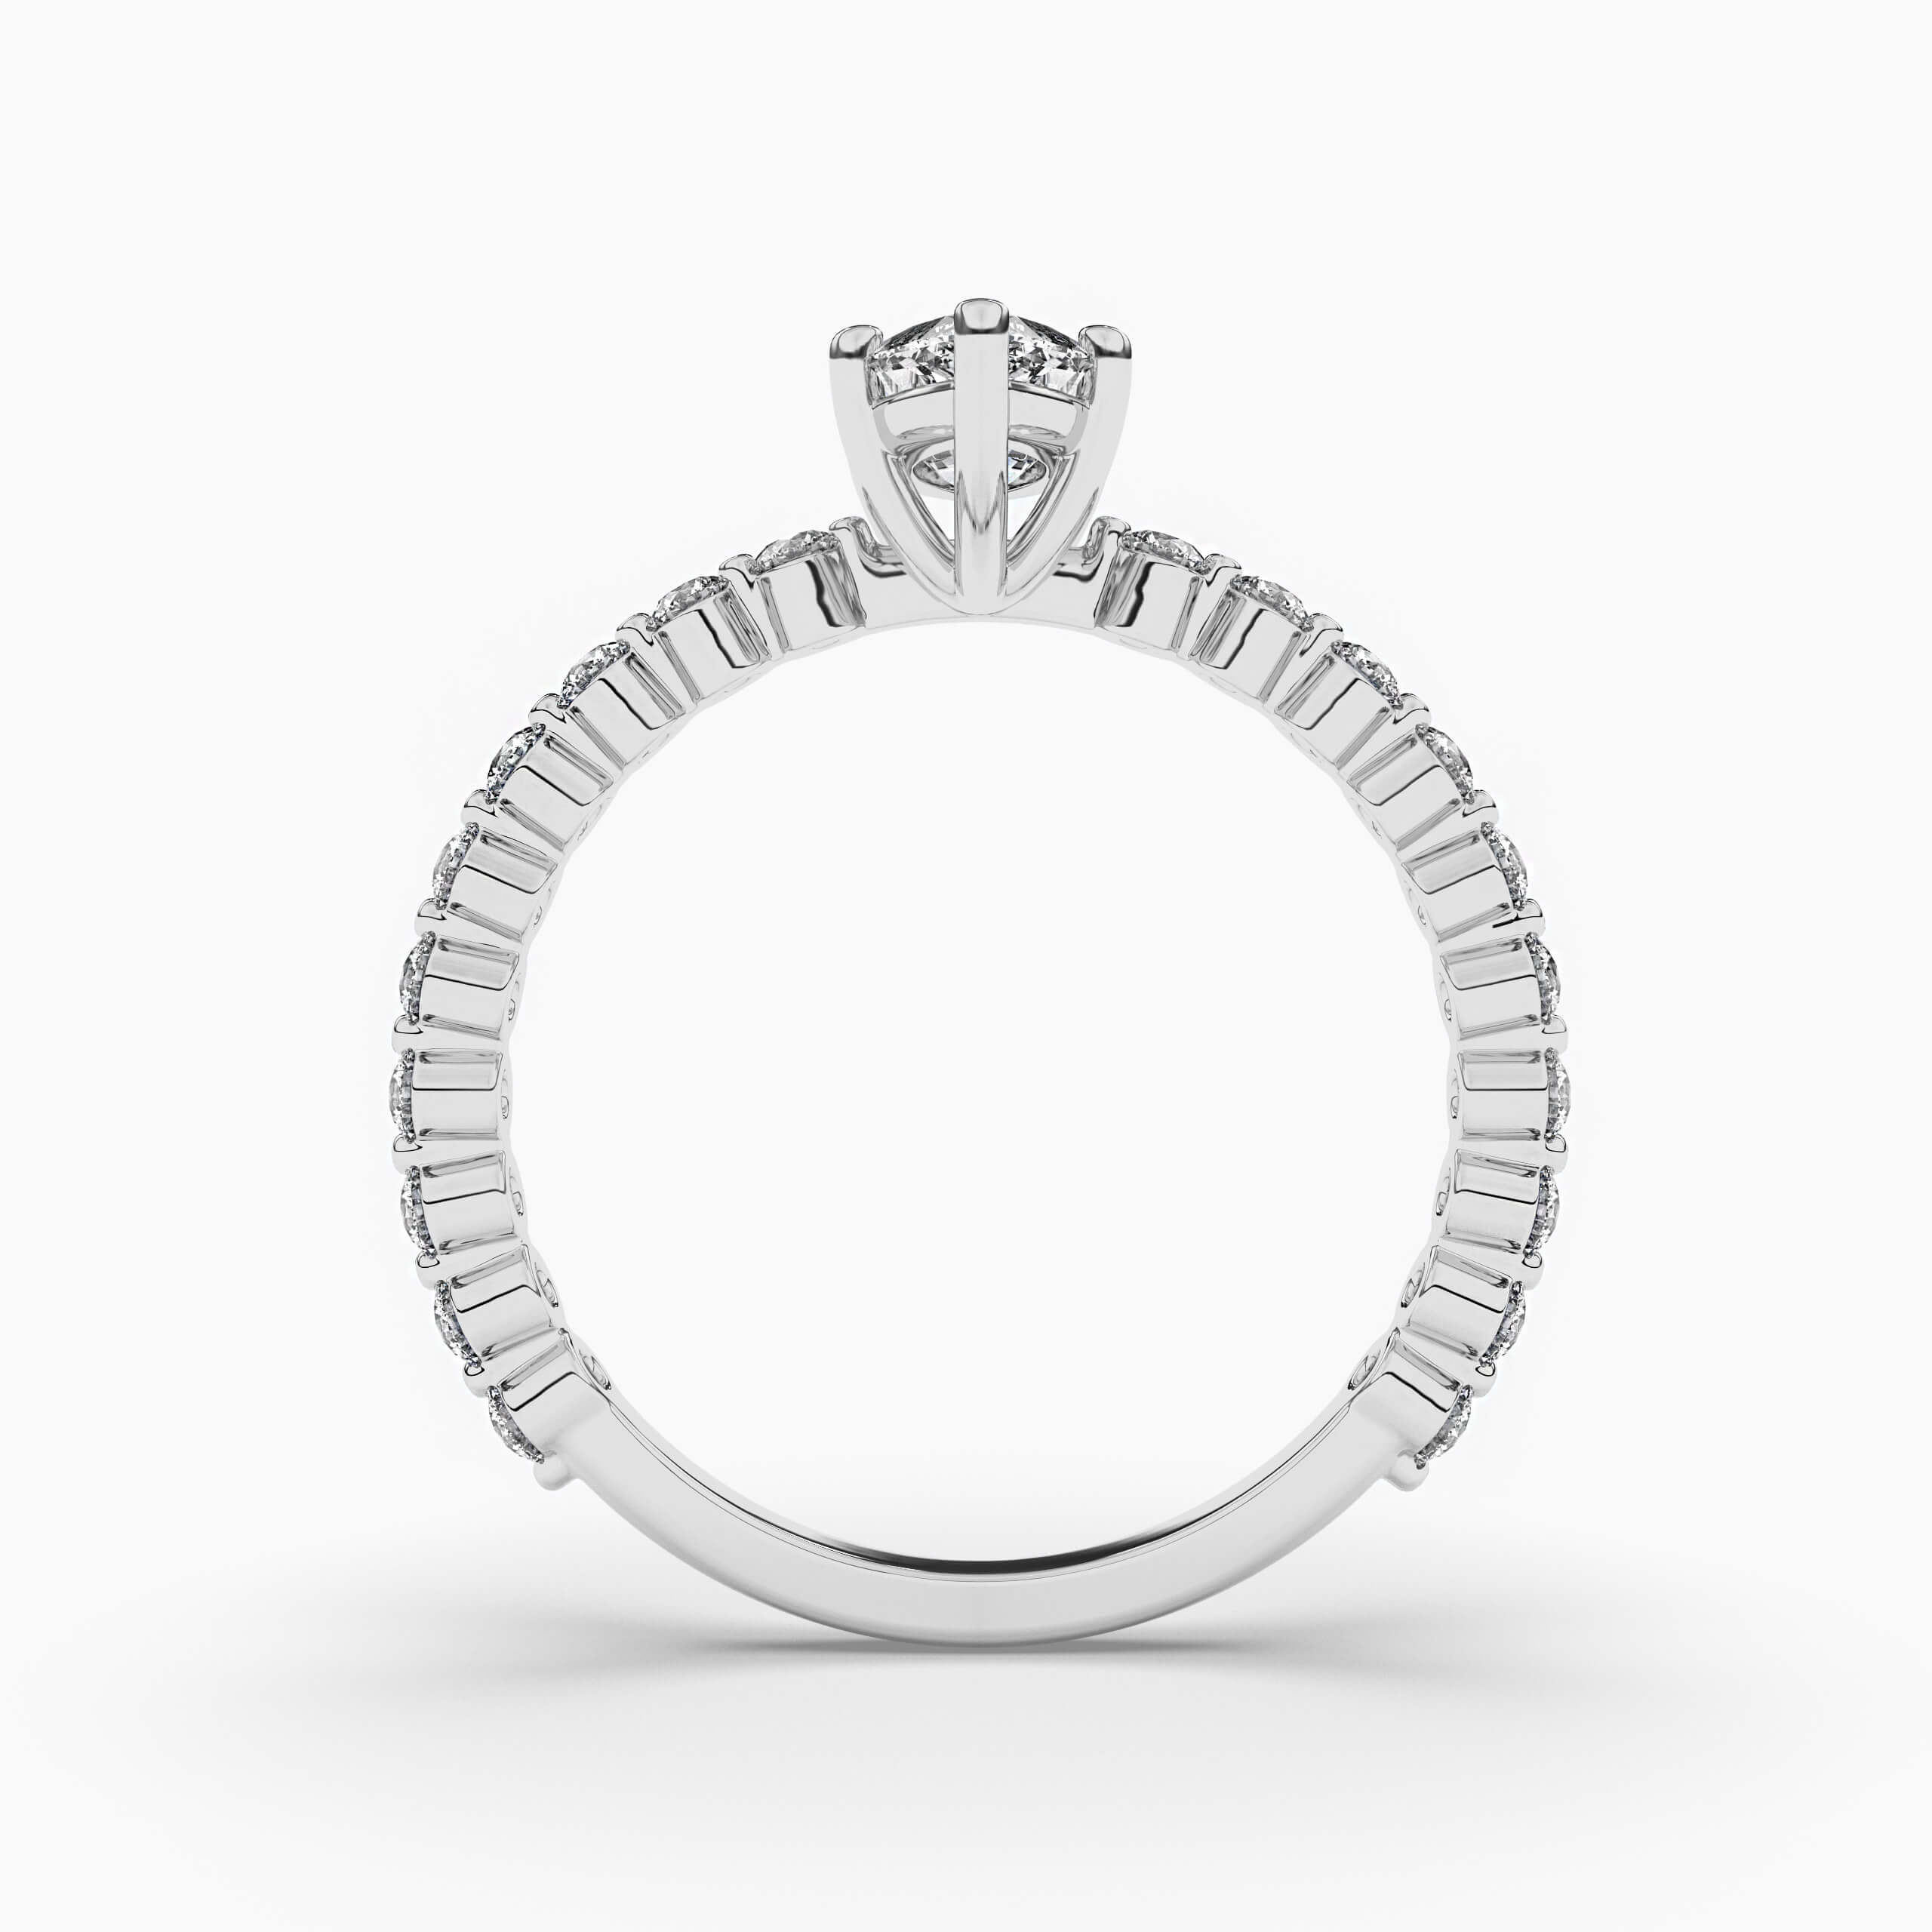 Marquise diamond center and Round side diamonds engagement ring set in white gold